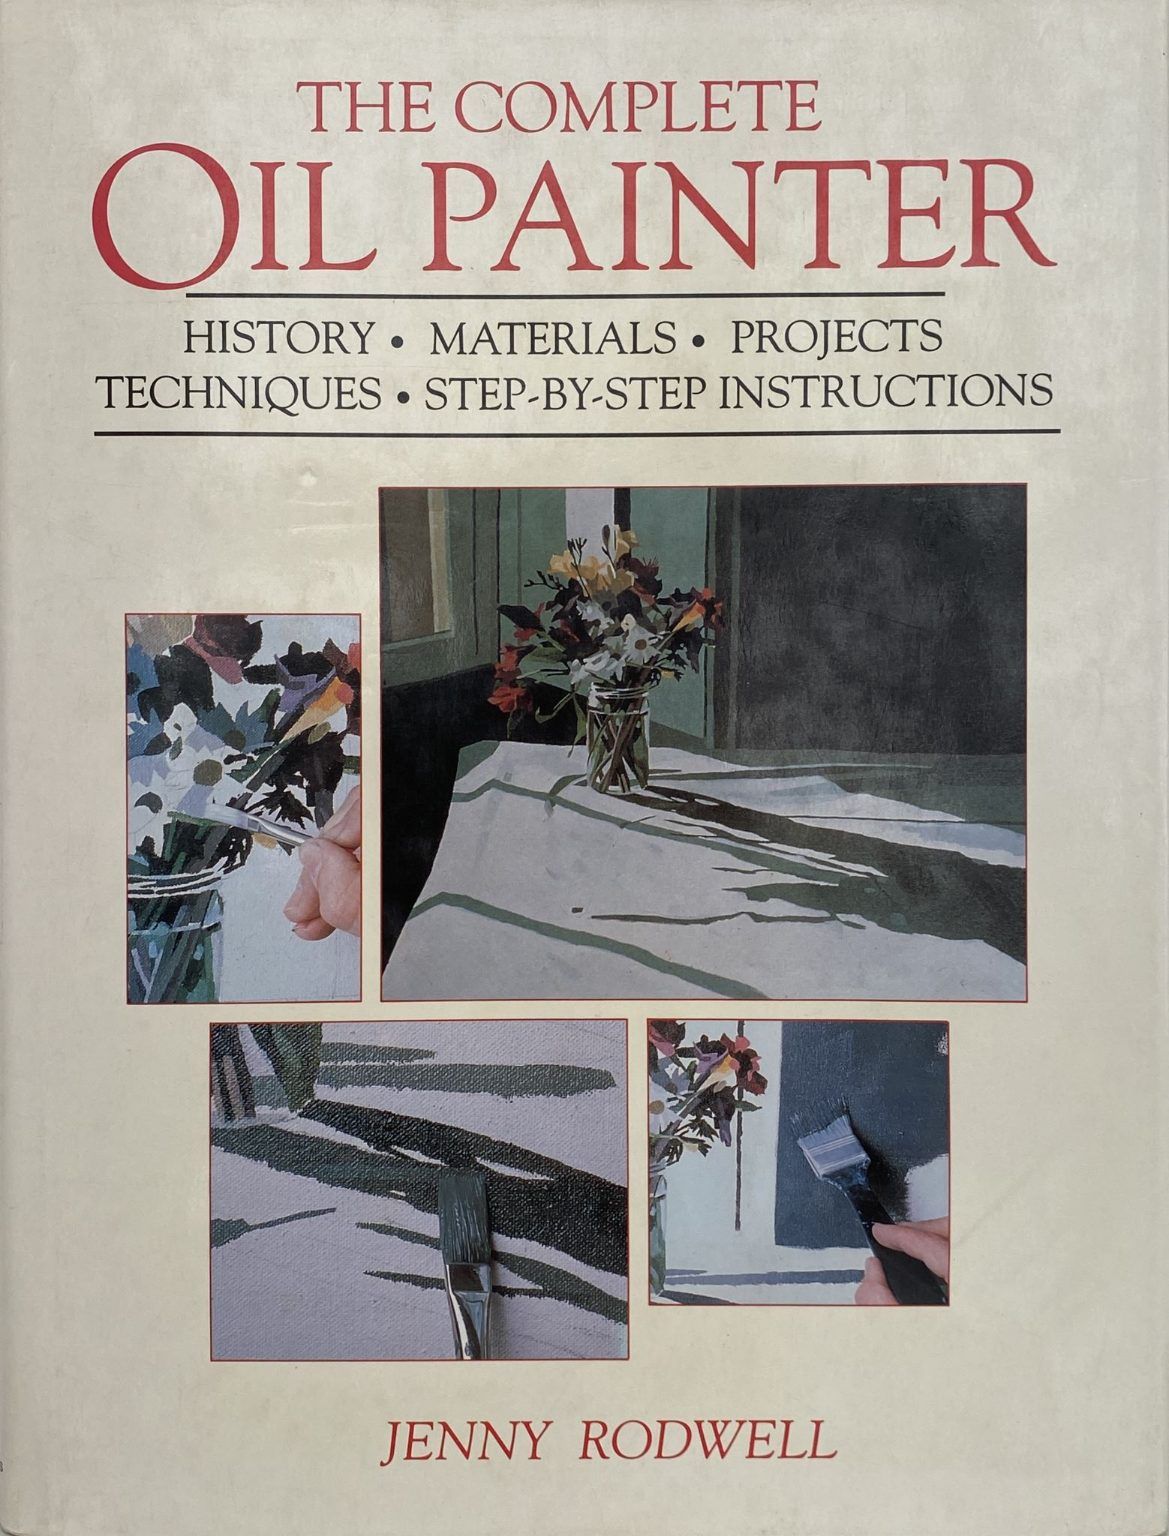 THE COMPLETE OIL PAINTER: History, Materials, Projects, Techniques, Step-By-Step Instructions